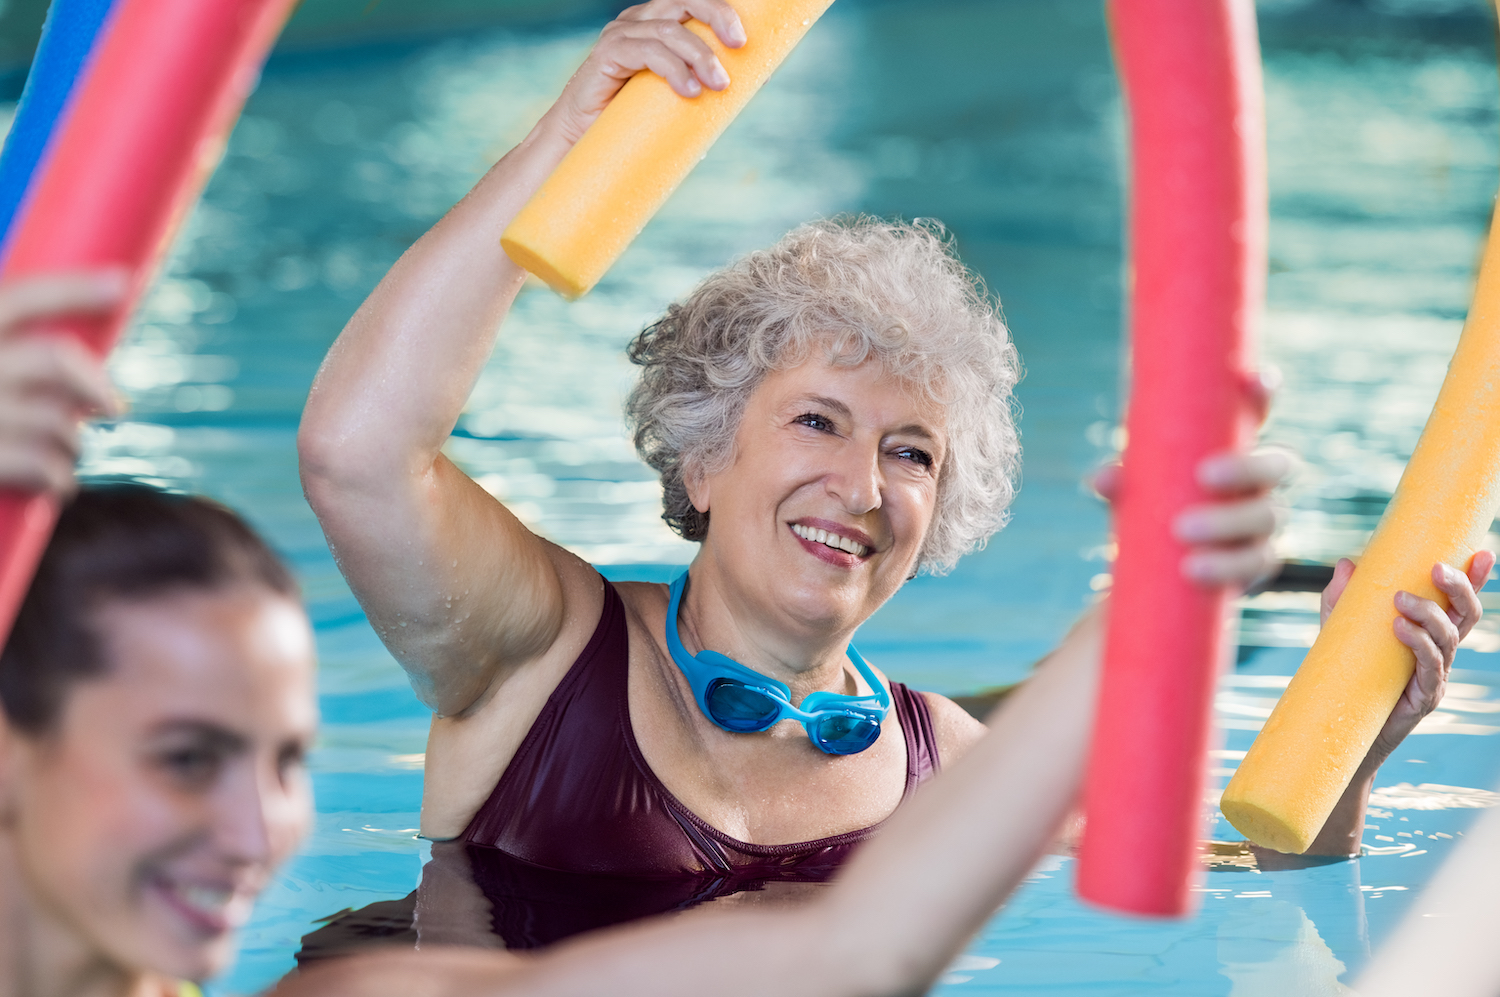 Aquatic therapy can use pool noodles as therapy